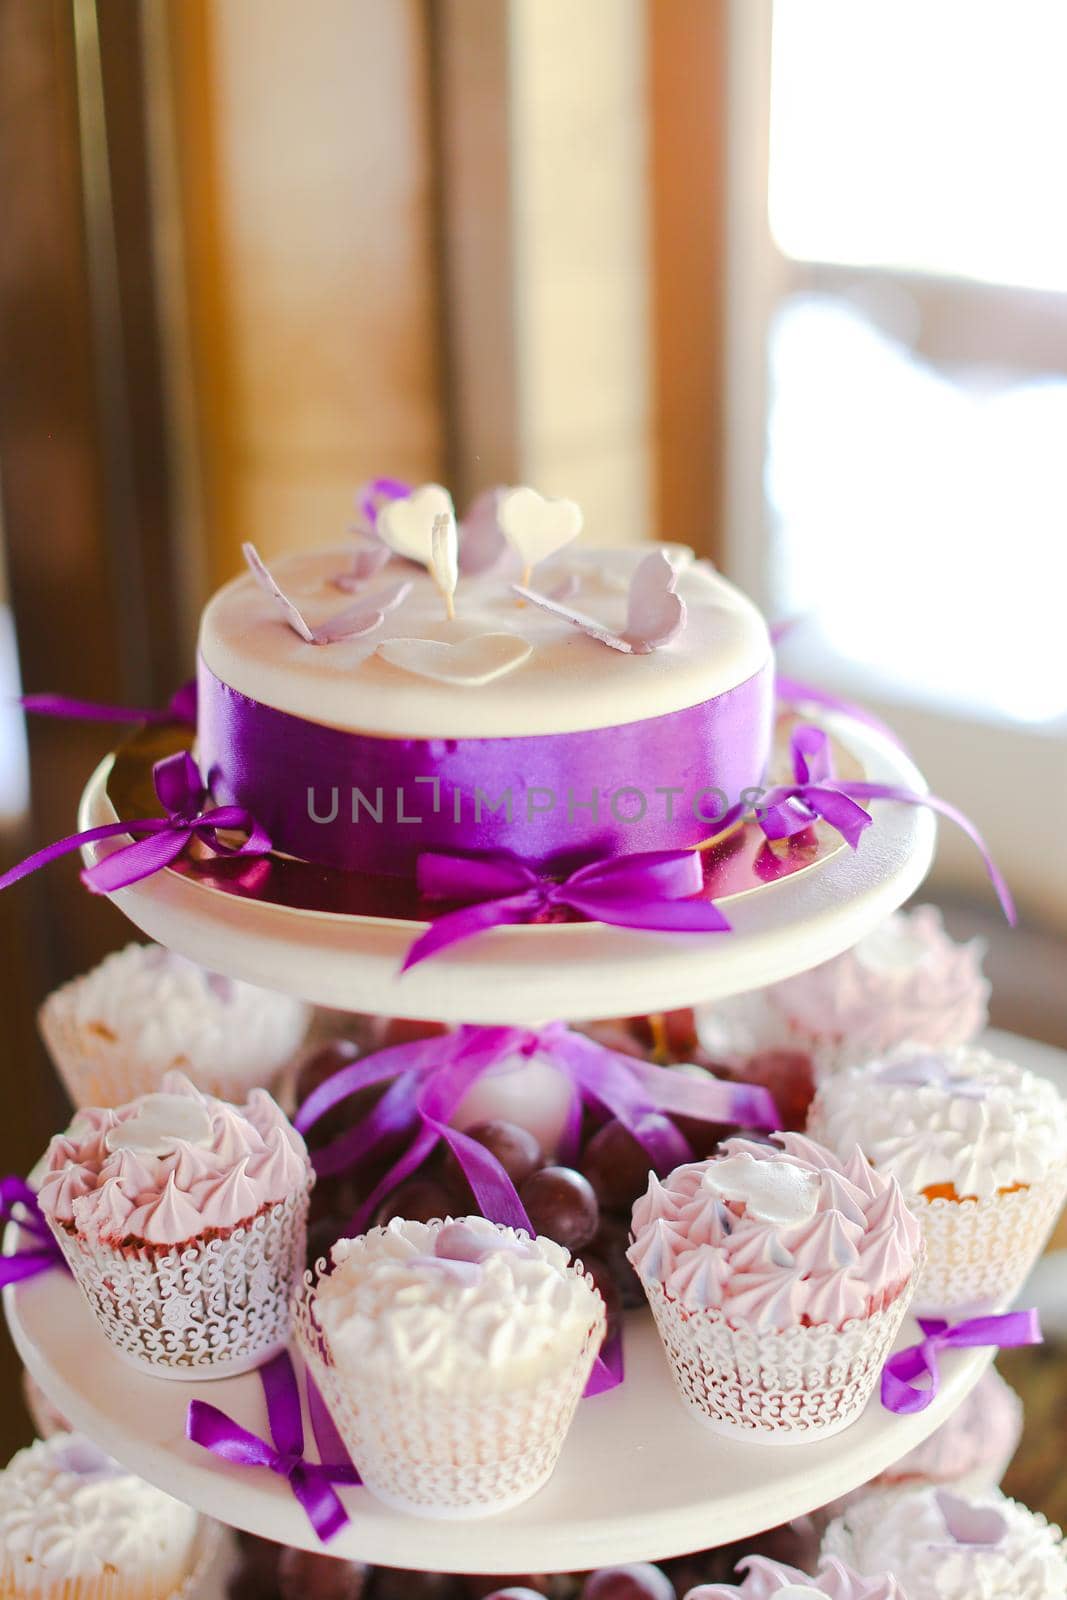 Violet decorations and sweet yummy cakes for party. by sisterspro